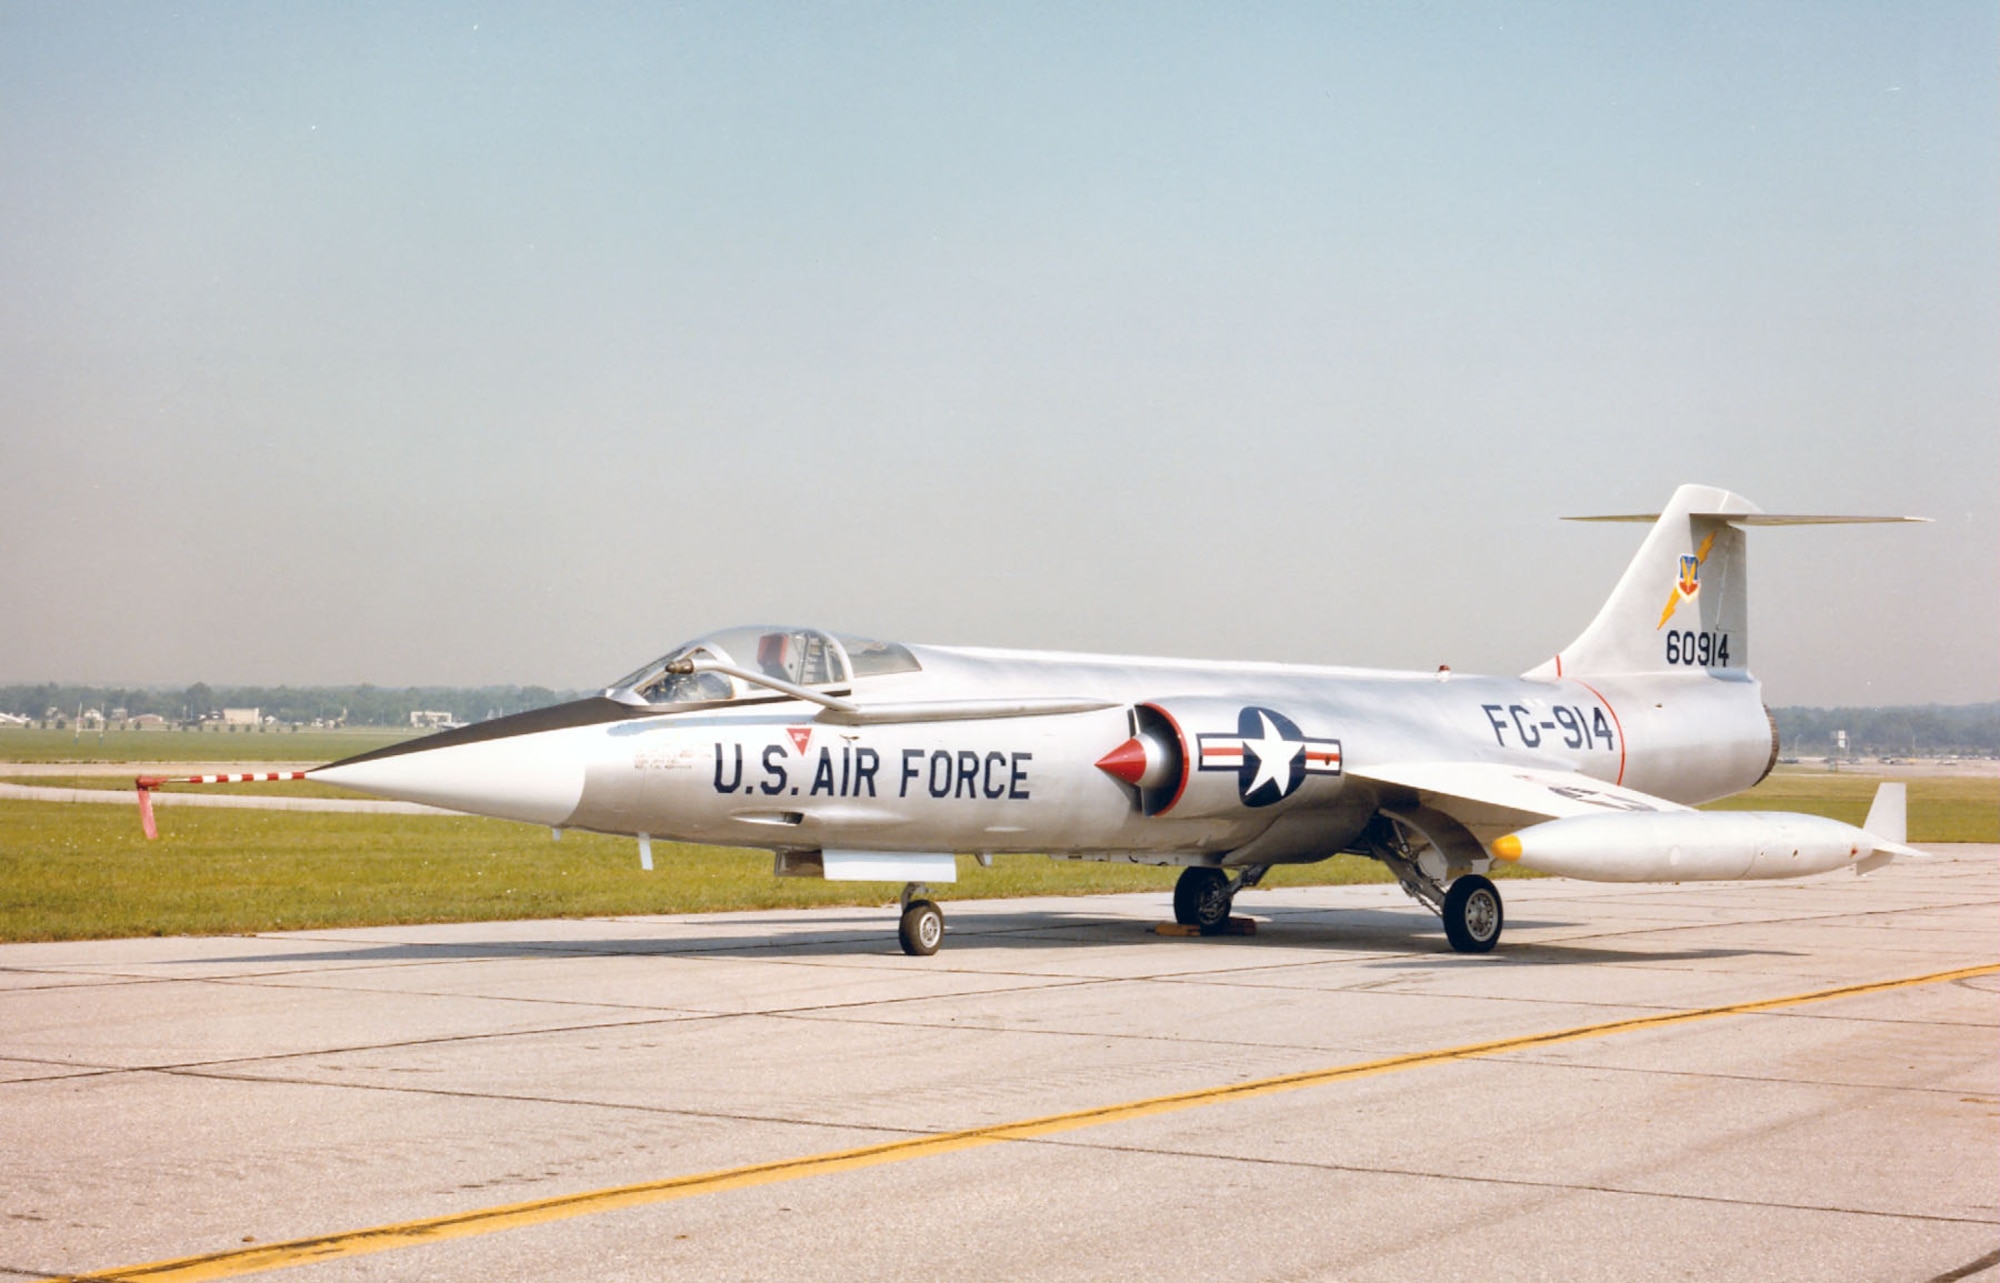 DAYTON, Ohio -- Lockheed F-104C Starfighter at the National Museum of the United States Air Force. (U.S. Air Force photo)